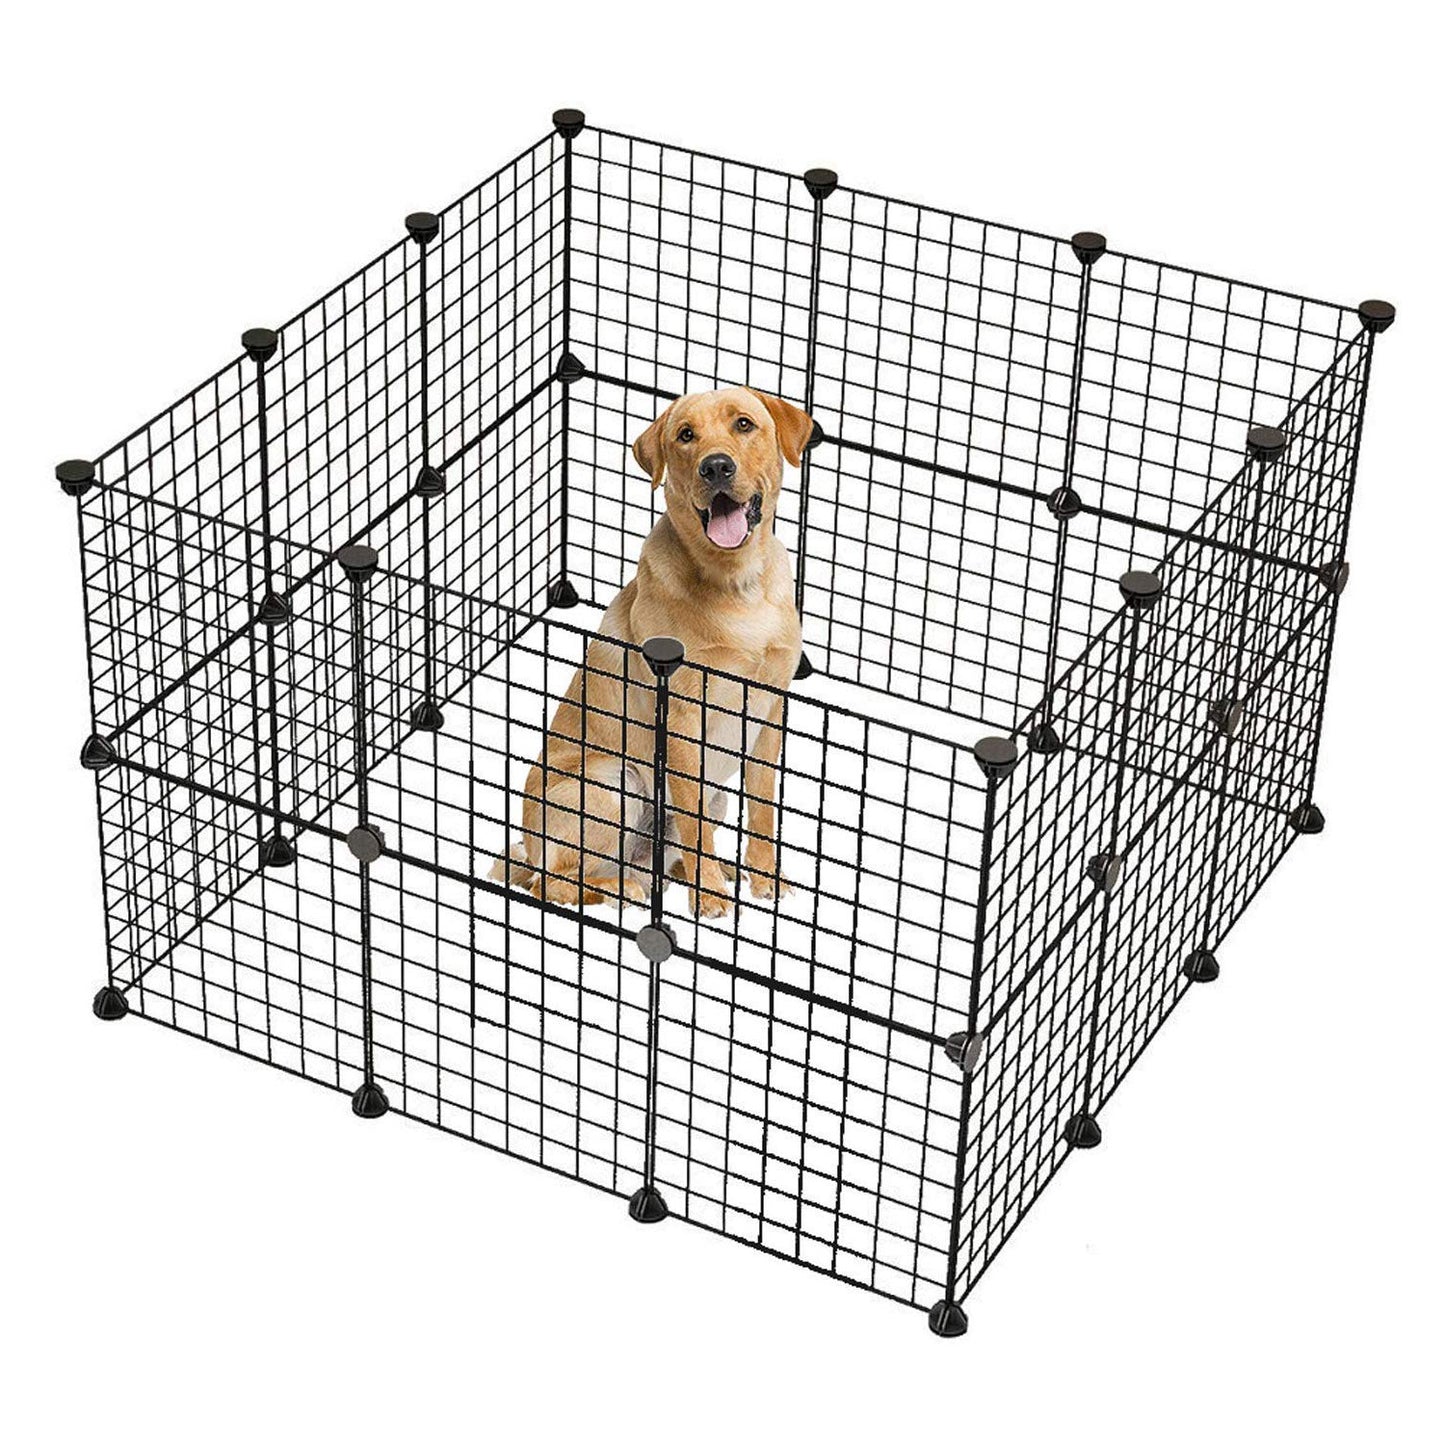 Pet Playpen, Small Animal Cage Indoor Portable Metal Wire Yard Fence for Small Animals, Guinea Pigs, Rabbits Kennel Crate Fence Tent Black 24pcs (And 8pcs For Free)